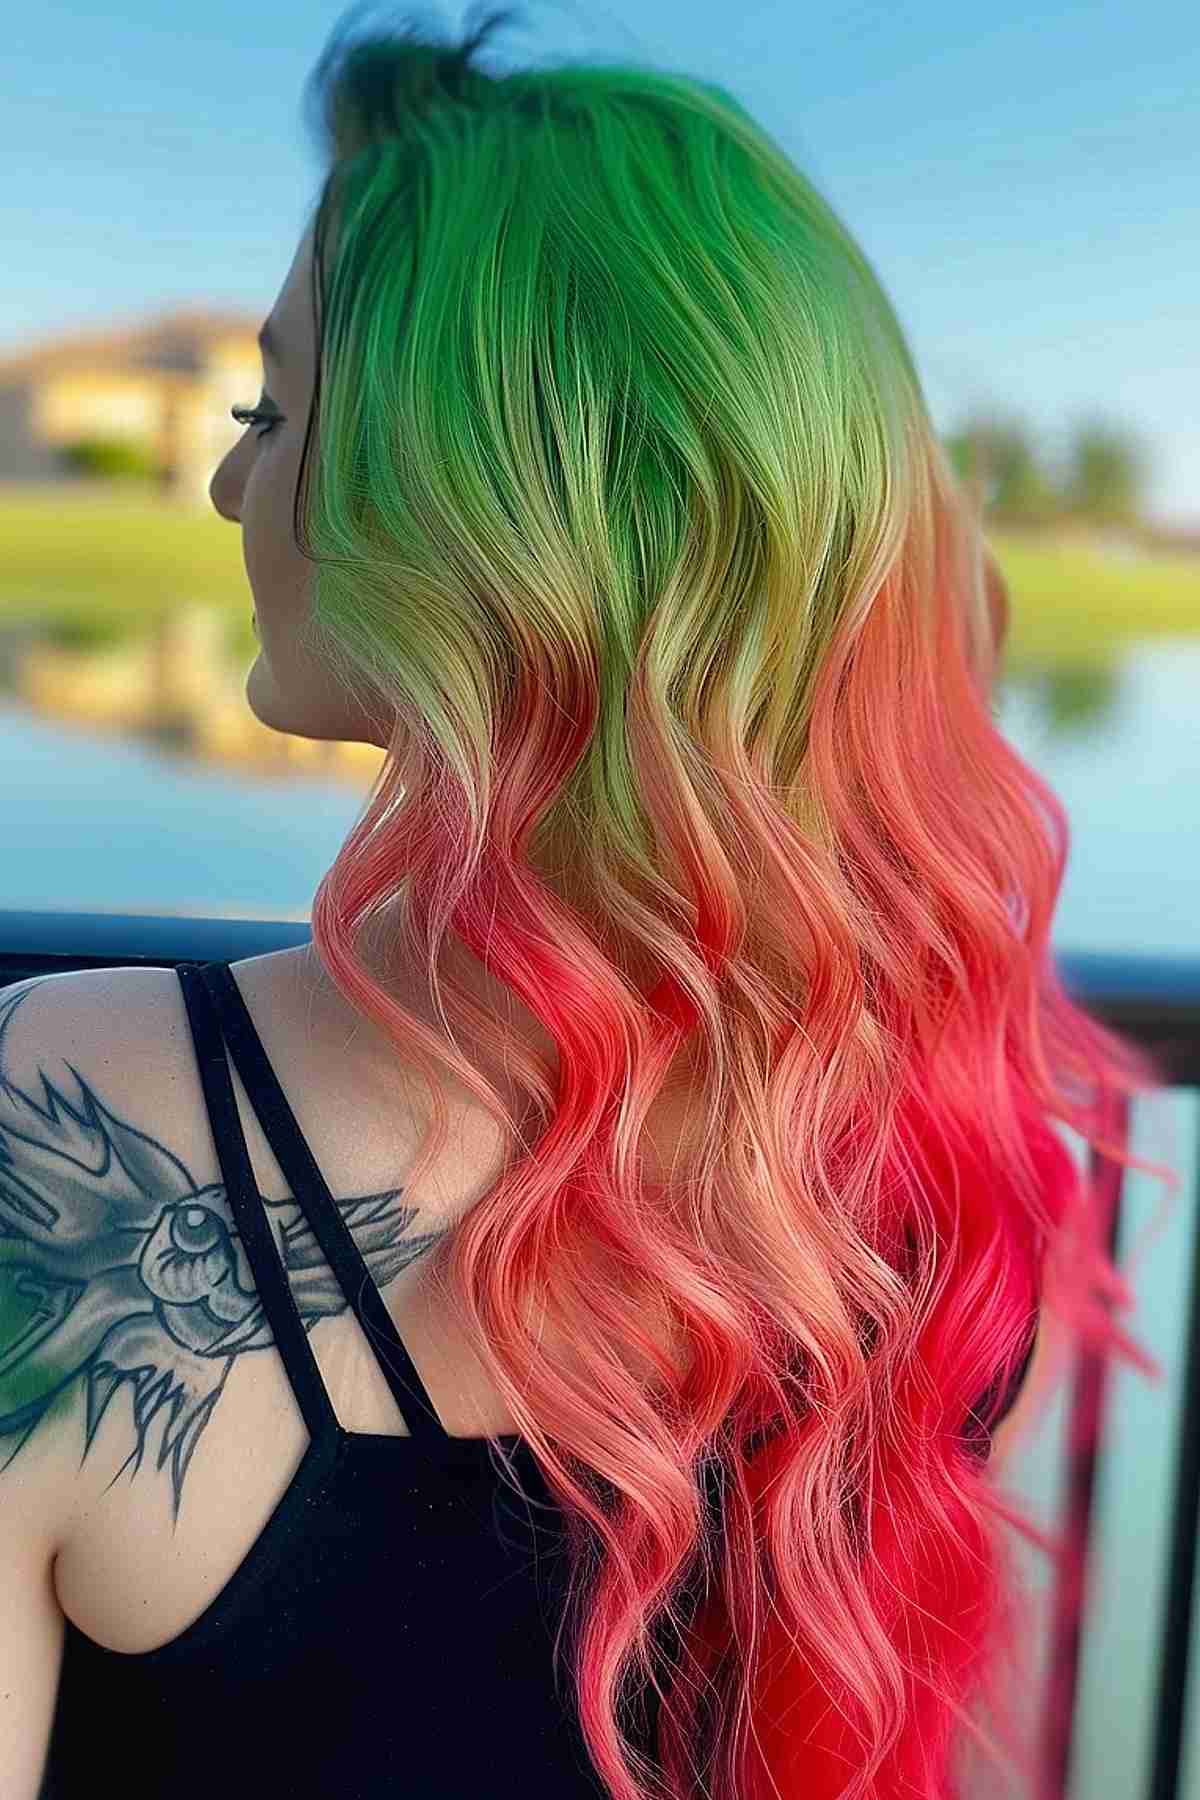 A woman with long, wavy hair exhibits a striking color transition from green to yellow to watermelon pink, creating a vivid and dynamic watermelon sunrise effect.